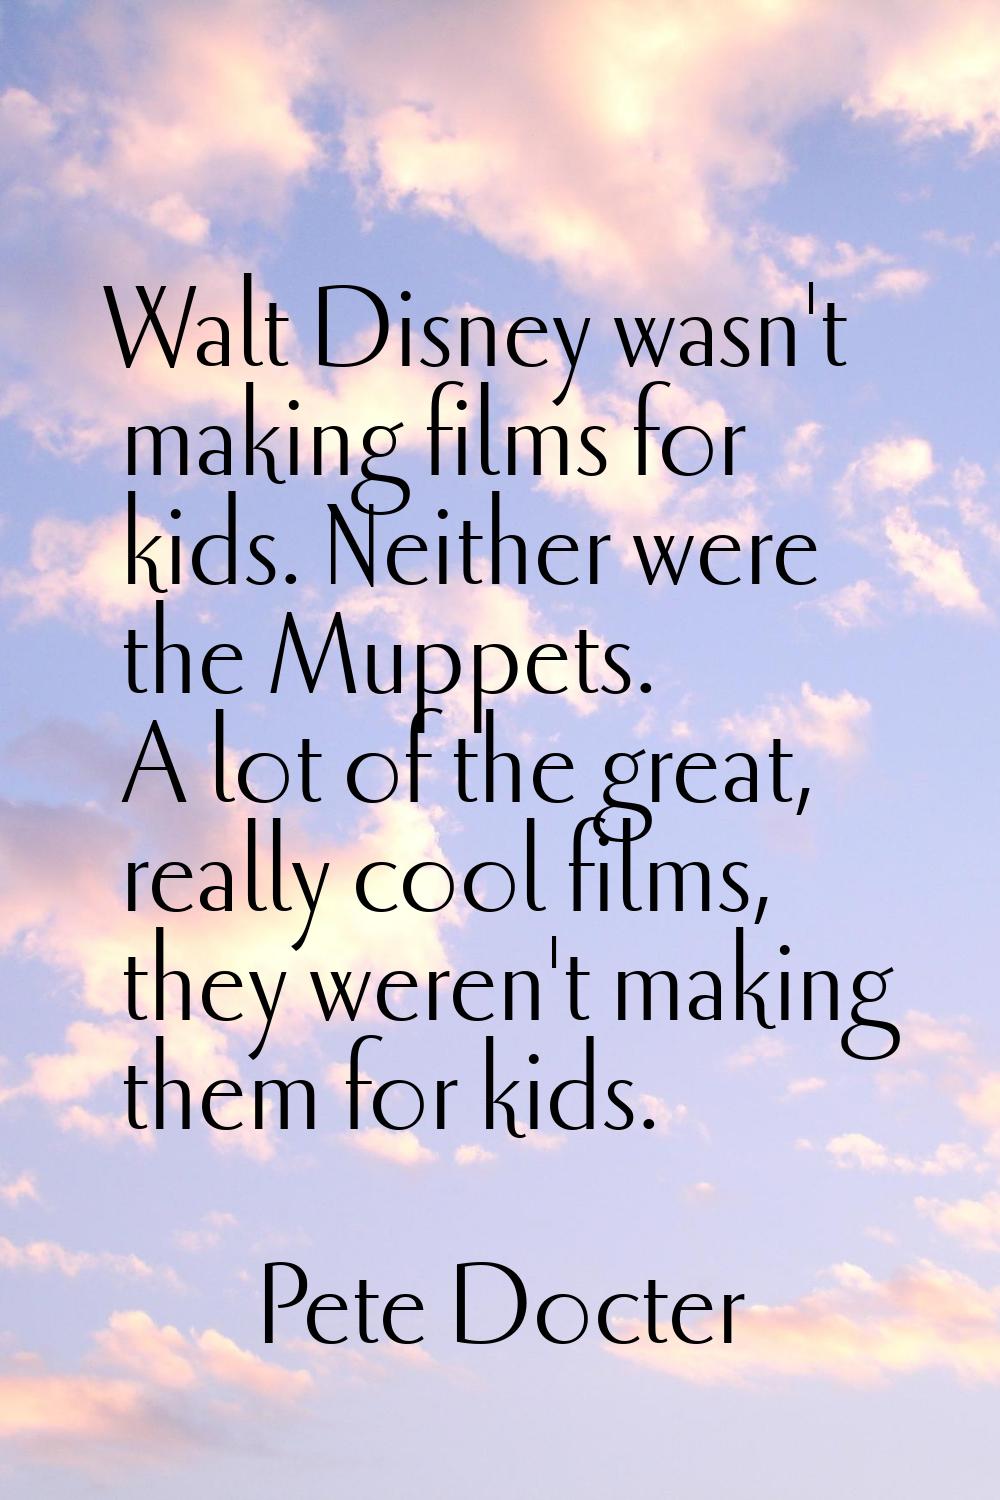 Walt Disney wasn't making films for kids. Neither were the Muppets. A lot of the great, really cool